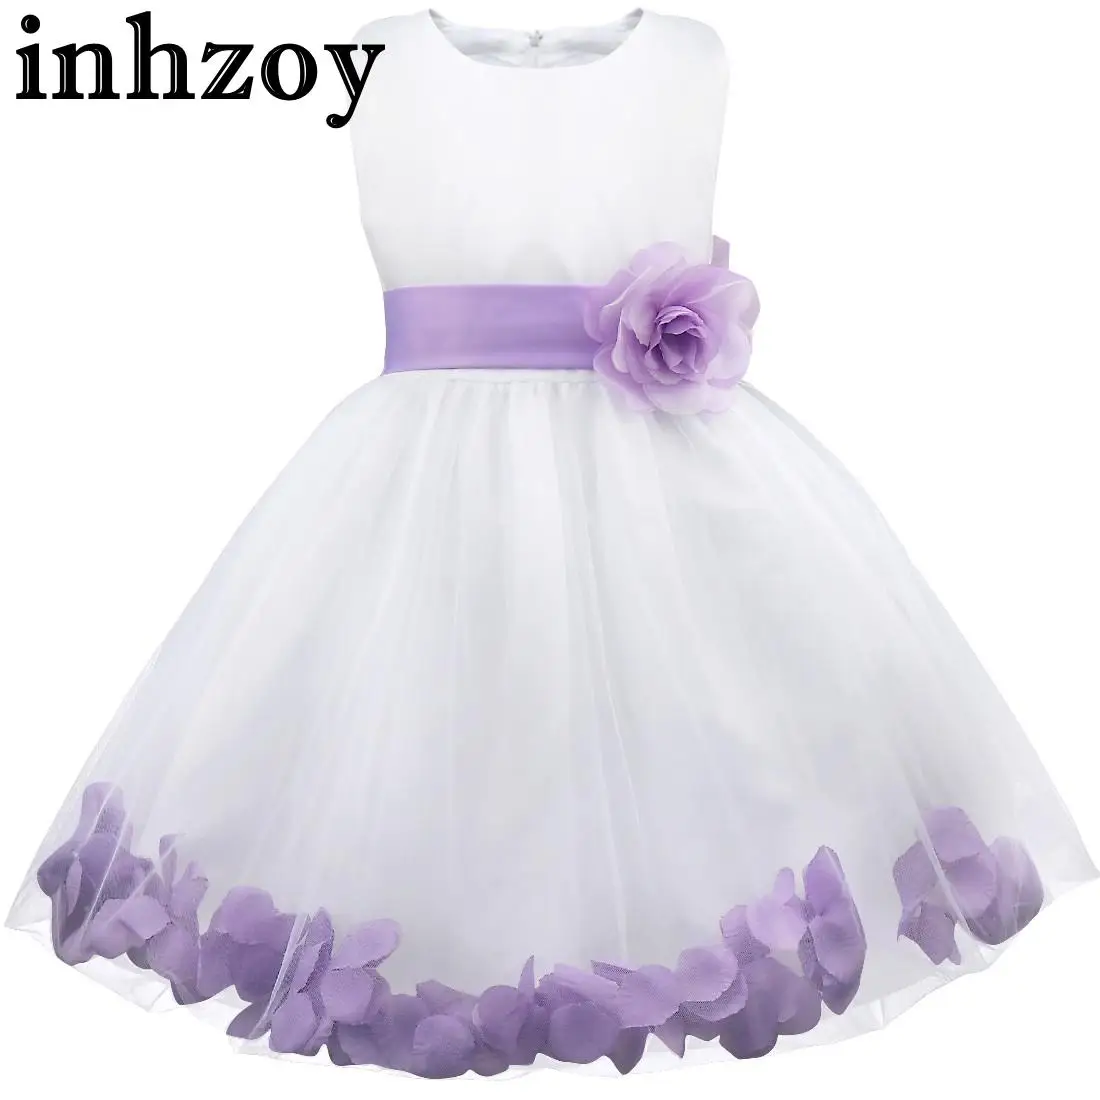 

Kids Girls Princess Birthday Party Dress Flower Appliqued Petals Trim Tulle Dress Wedding Pageant Bridesmaid Sleeveless Gowns